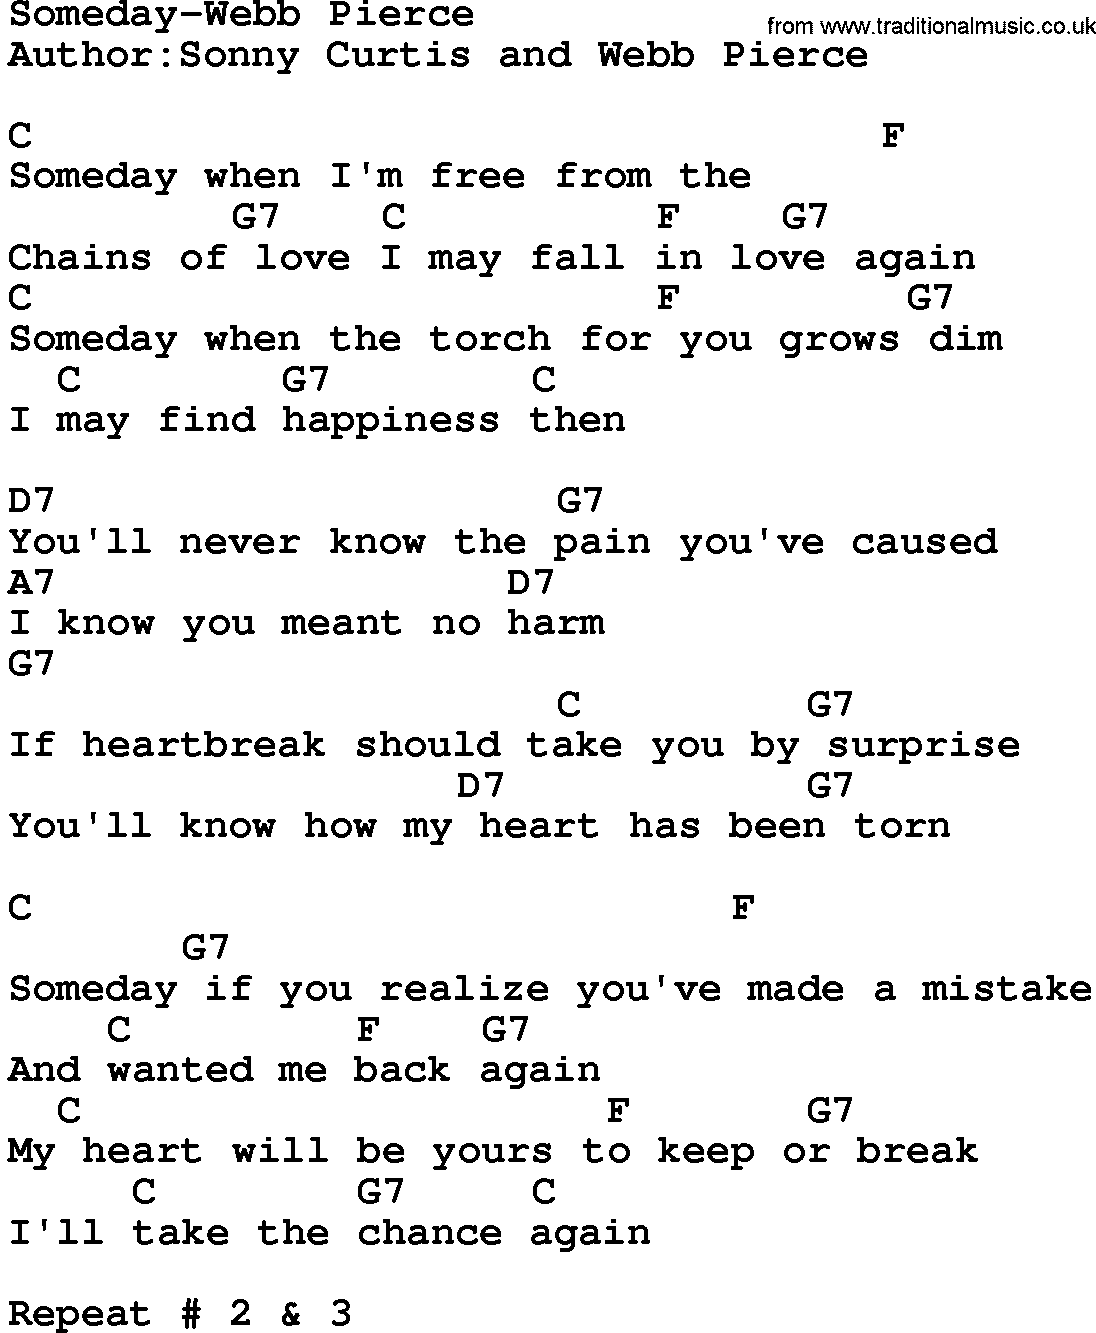 Country music song: Someday-Webb Pierce lyrics and chords